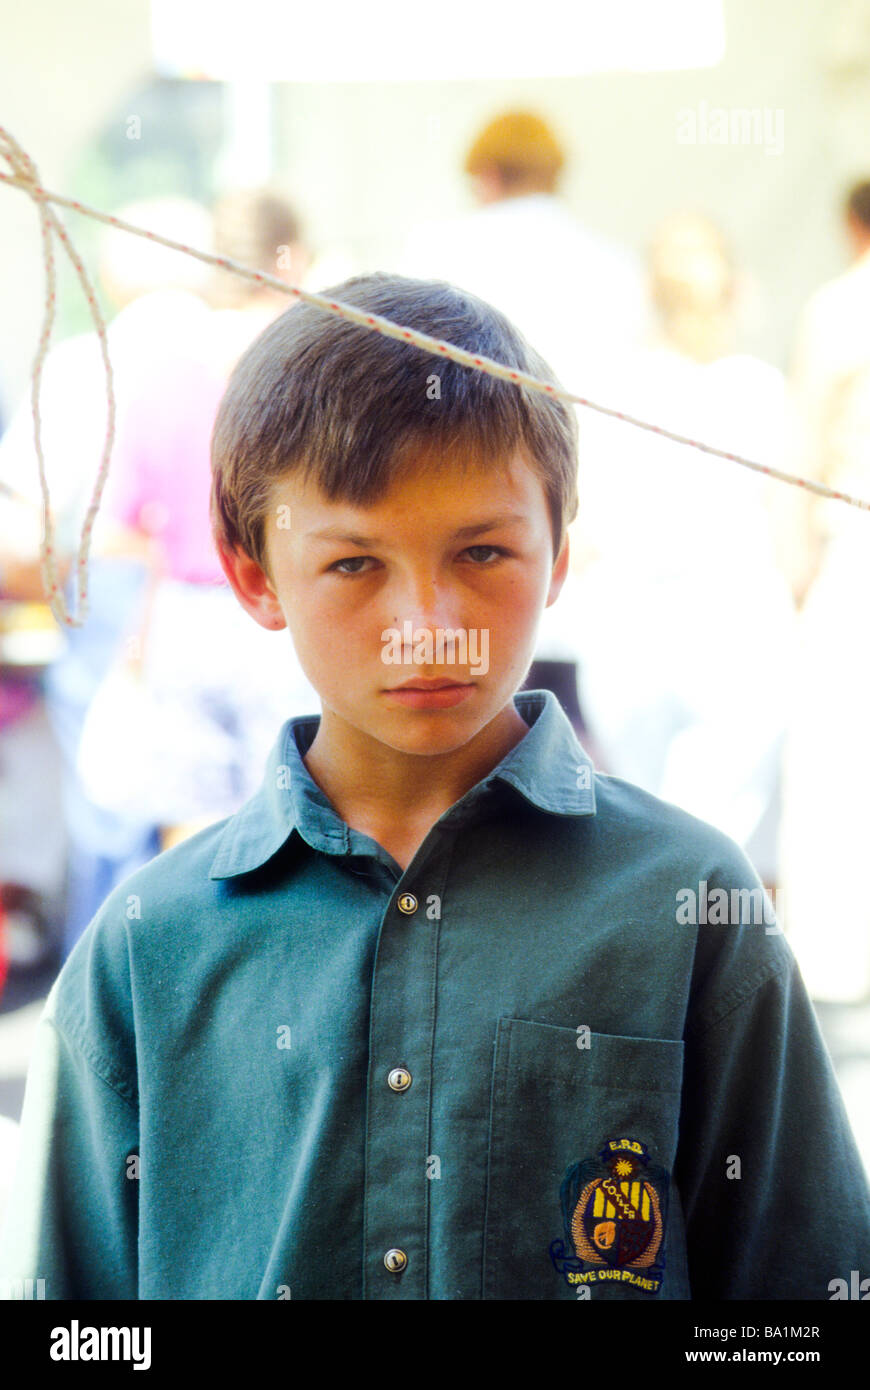 Boy serious expression face look stare direct portrait Stock Photo